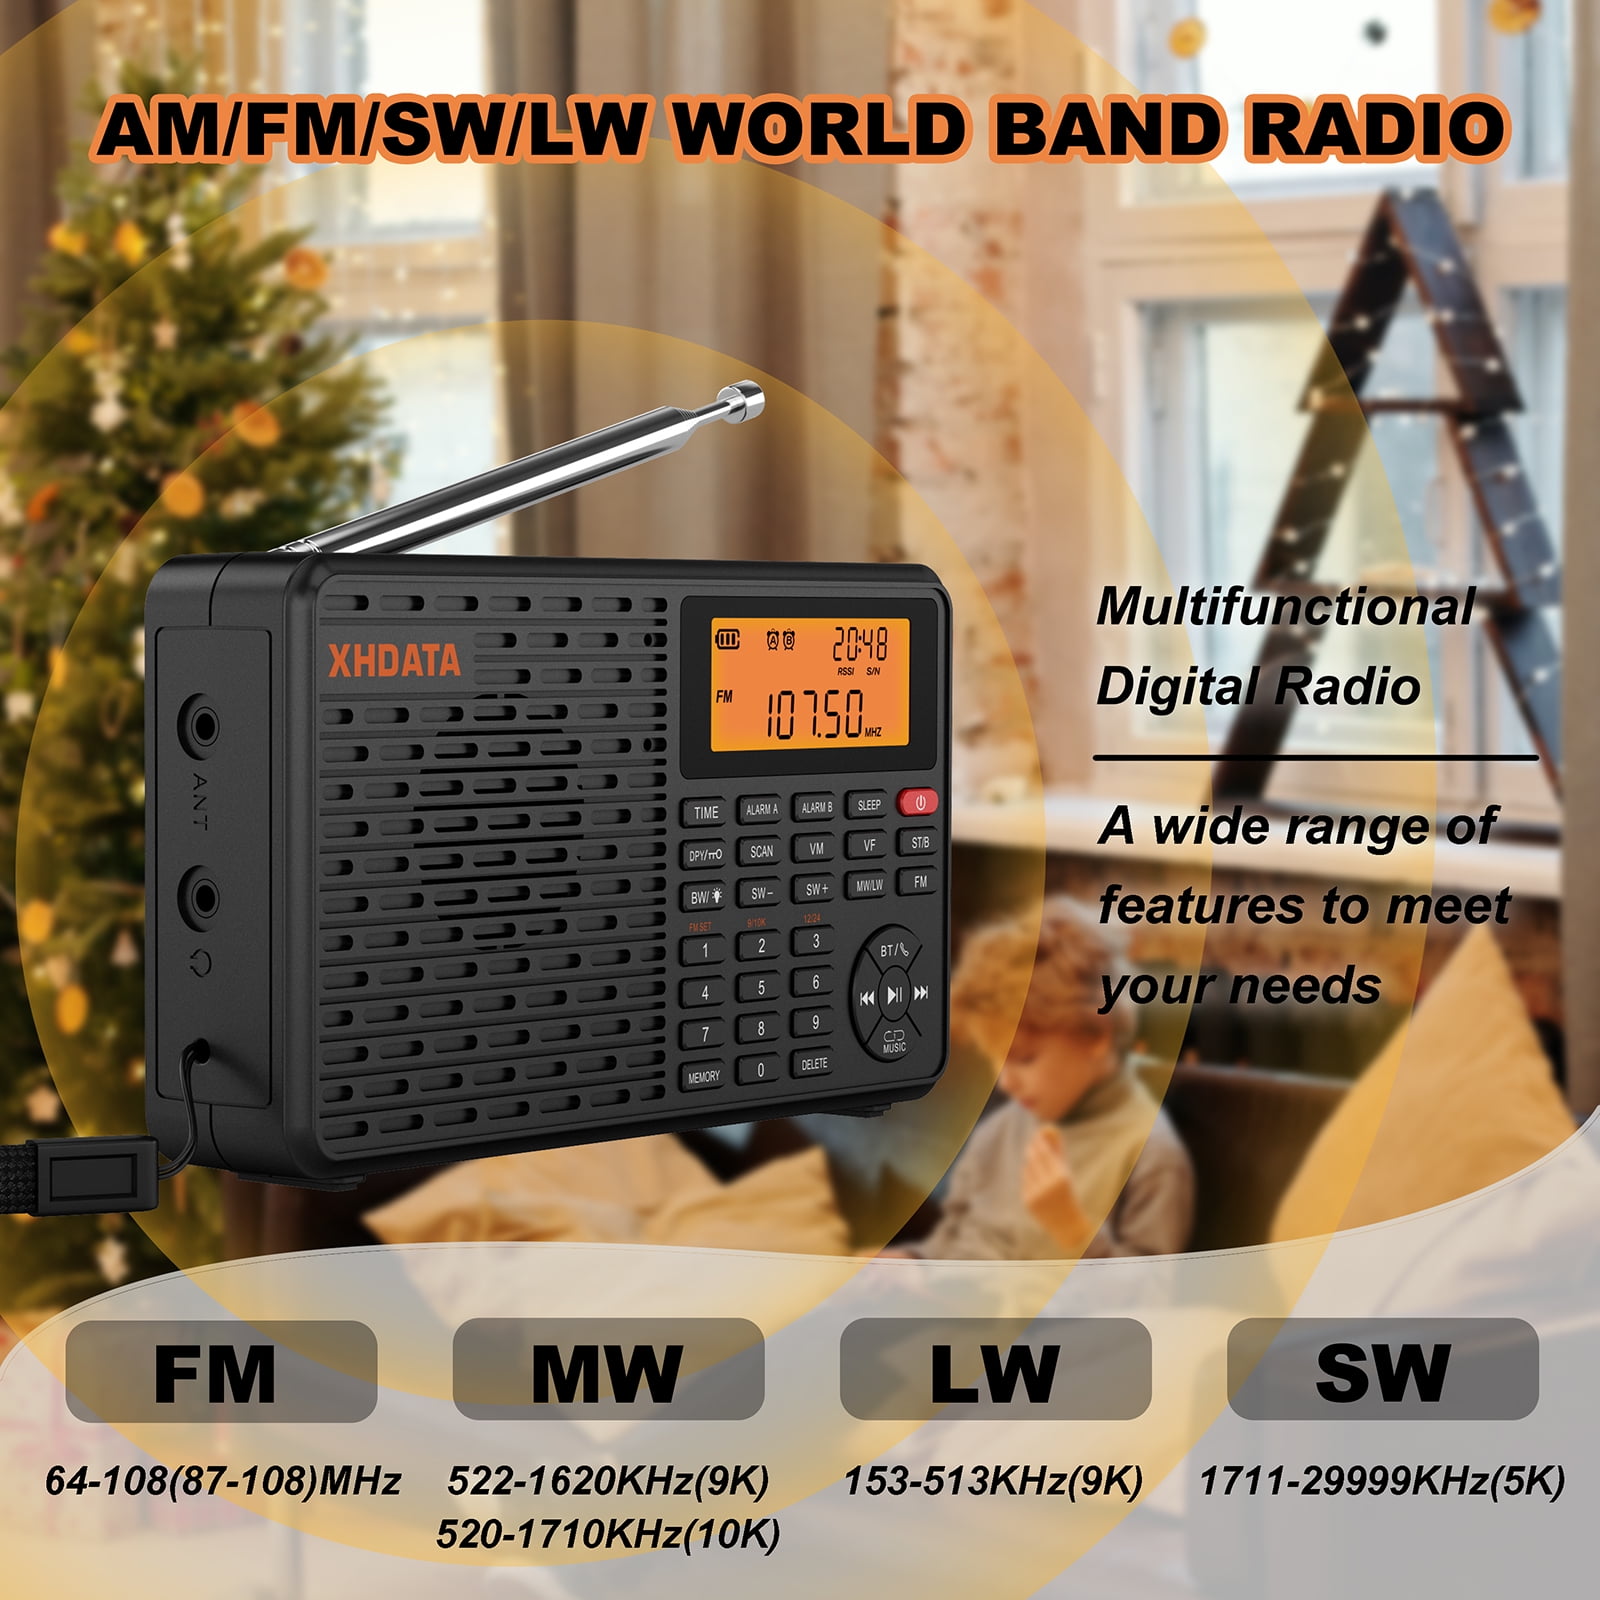 Sangean PR-D15 FM-Stereo/AM Rechargeable Portable Radio with